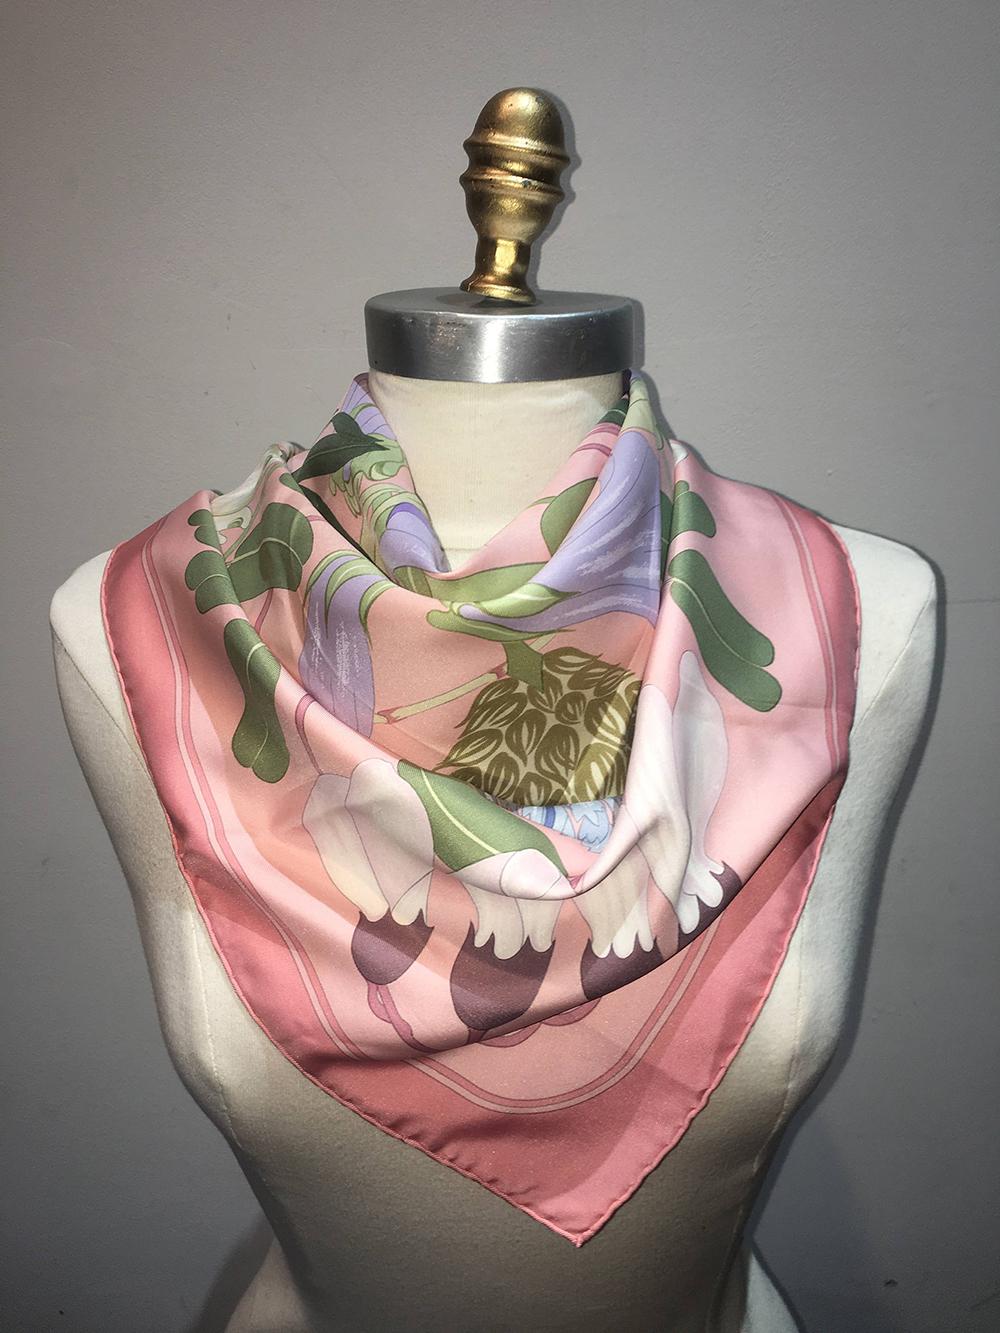 Great Condition Cerise Pink Vintage Satin Scarf 1970s Purchased in France